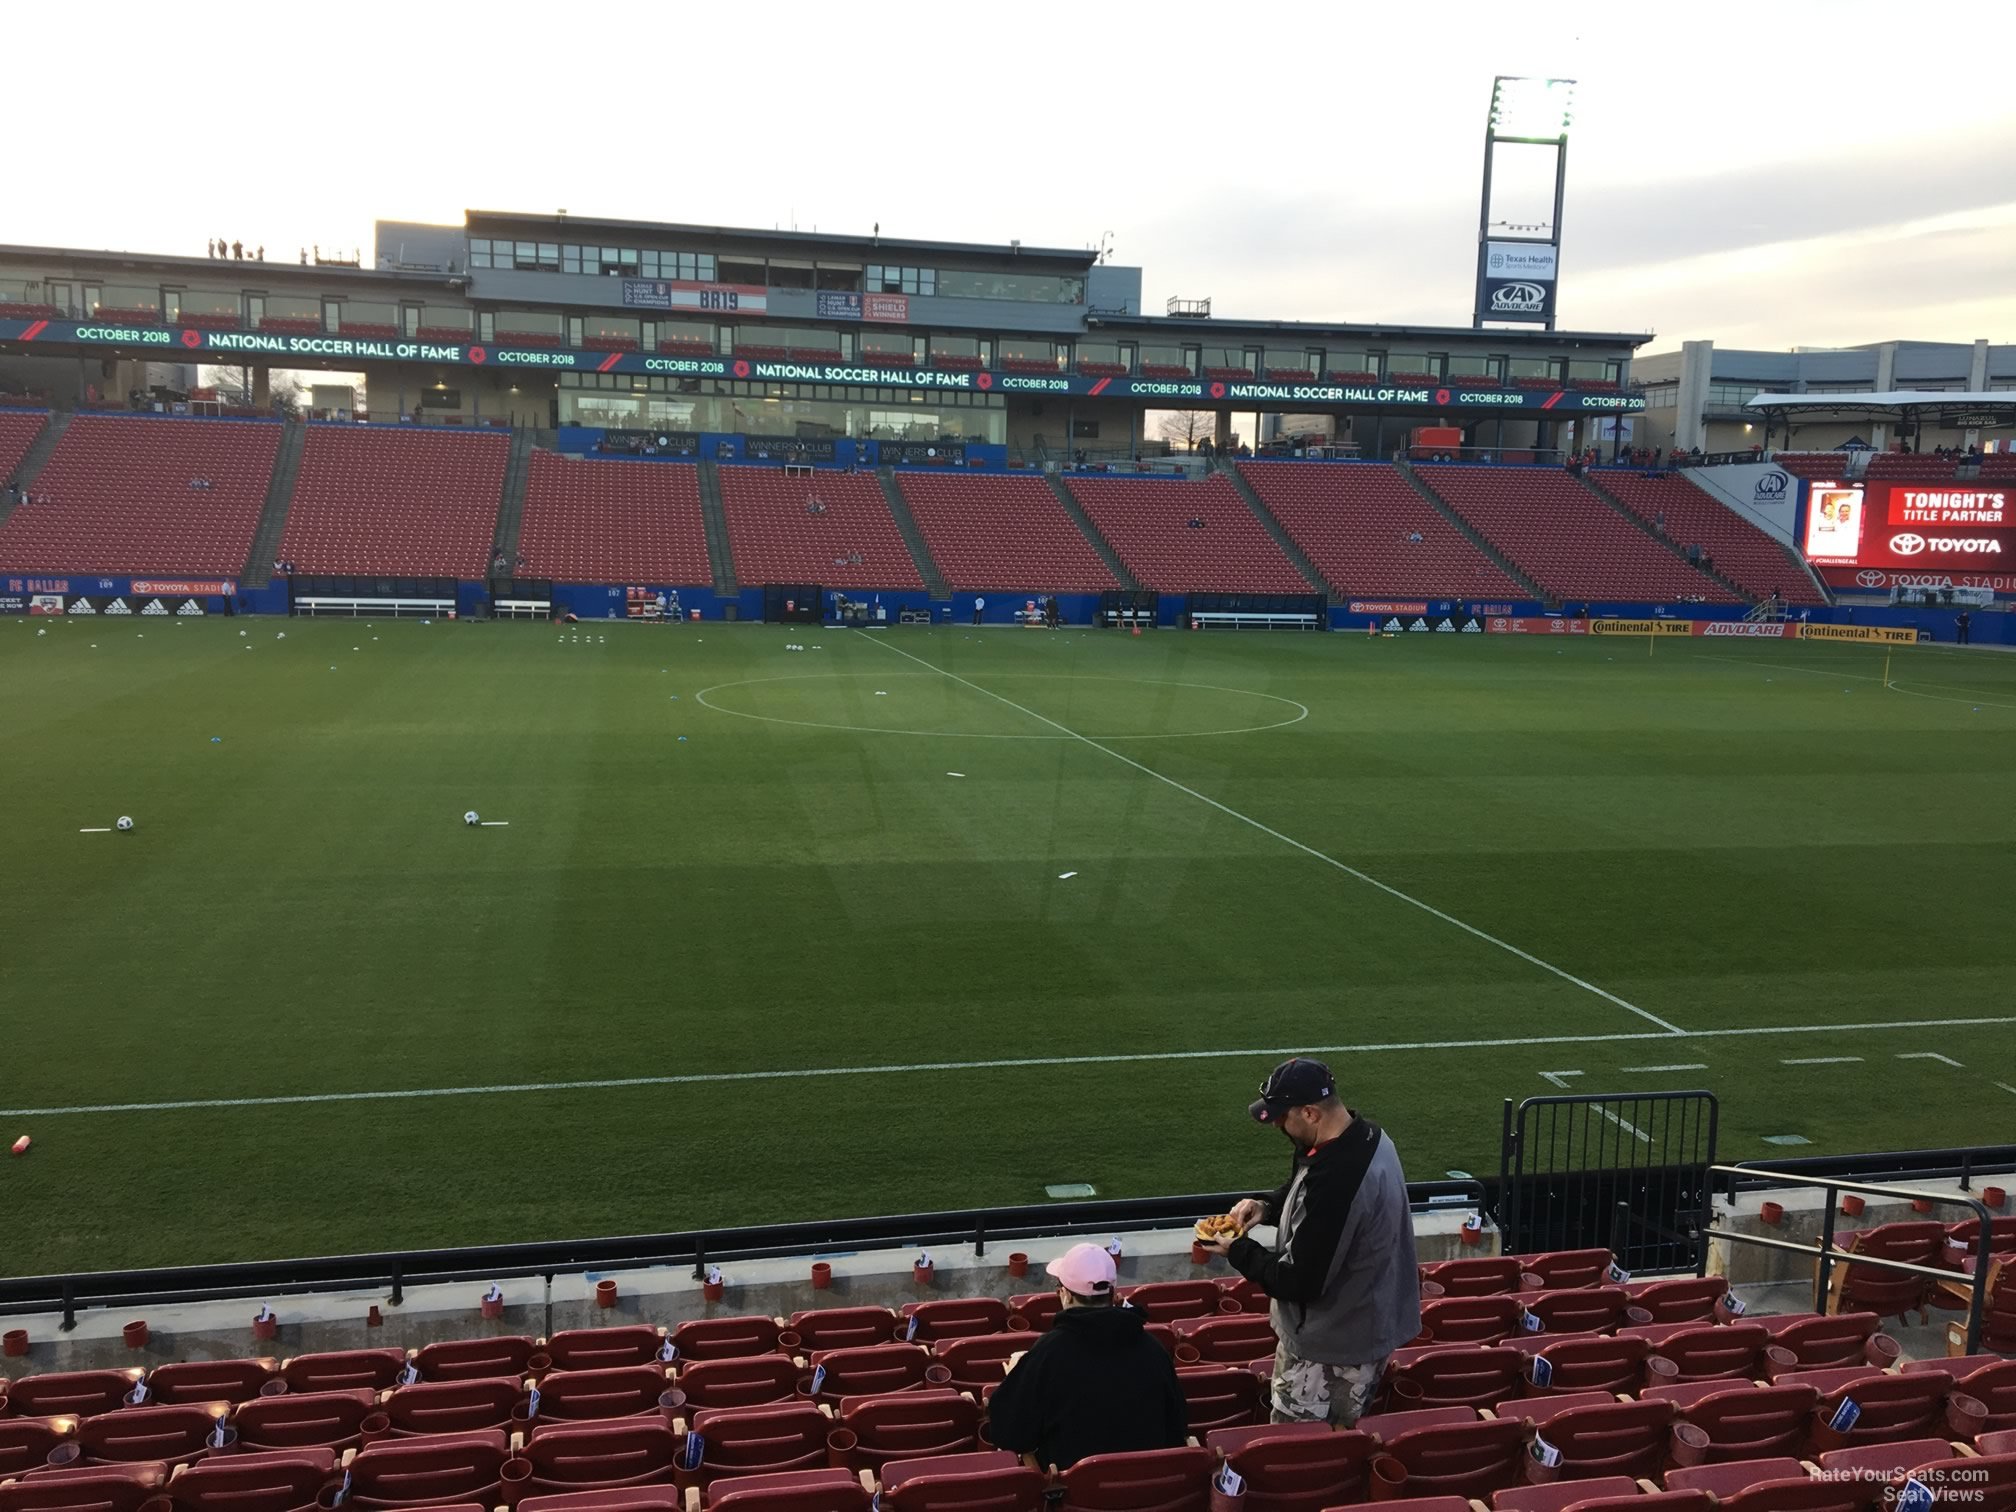 section 126, row 10 seat view  for soccer - toyota stadium